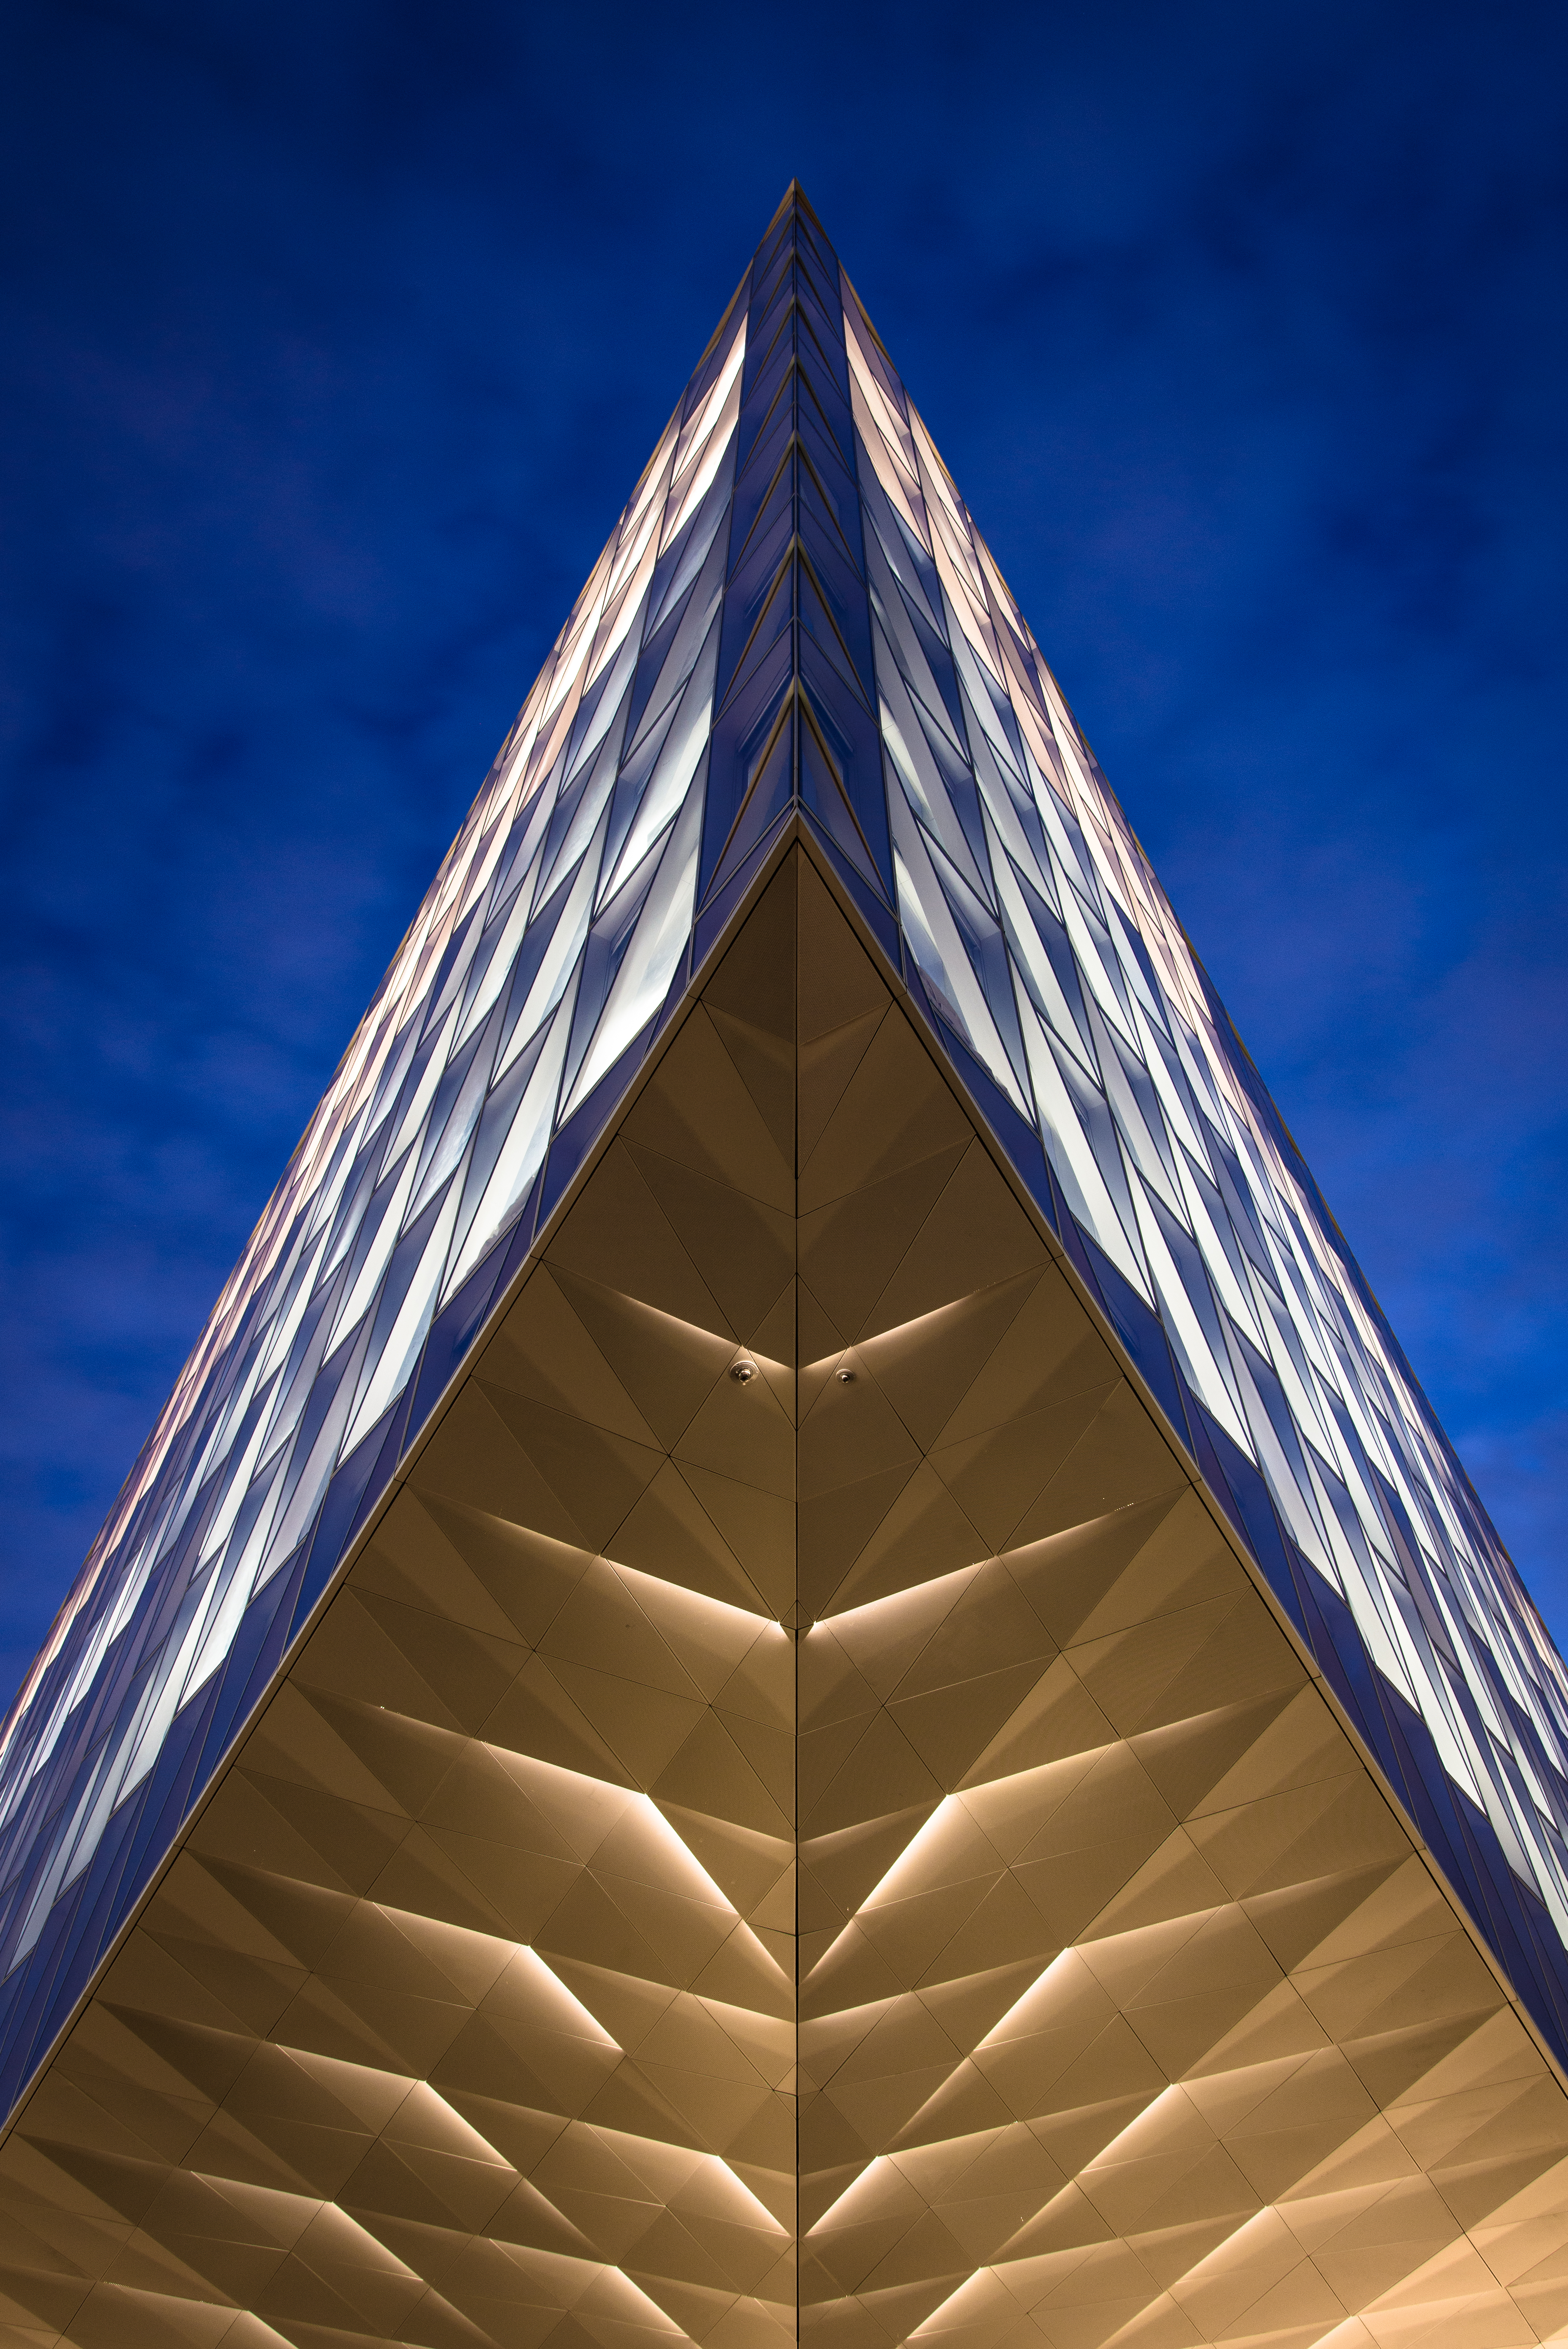 cities, architecture, facade, angle, corner iphone wallpaper